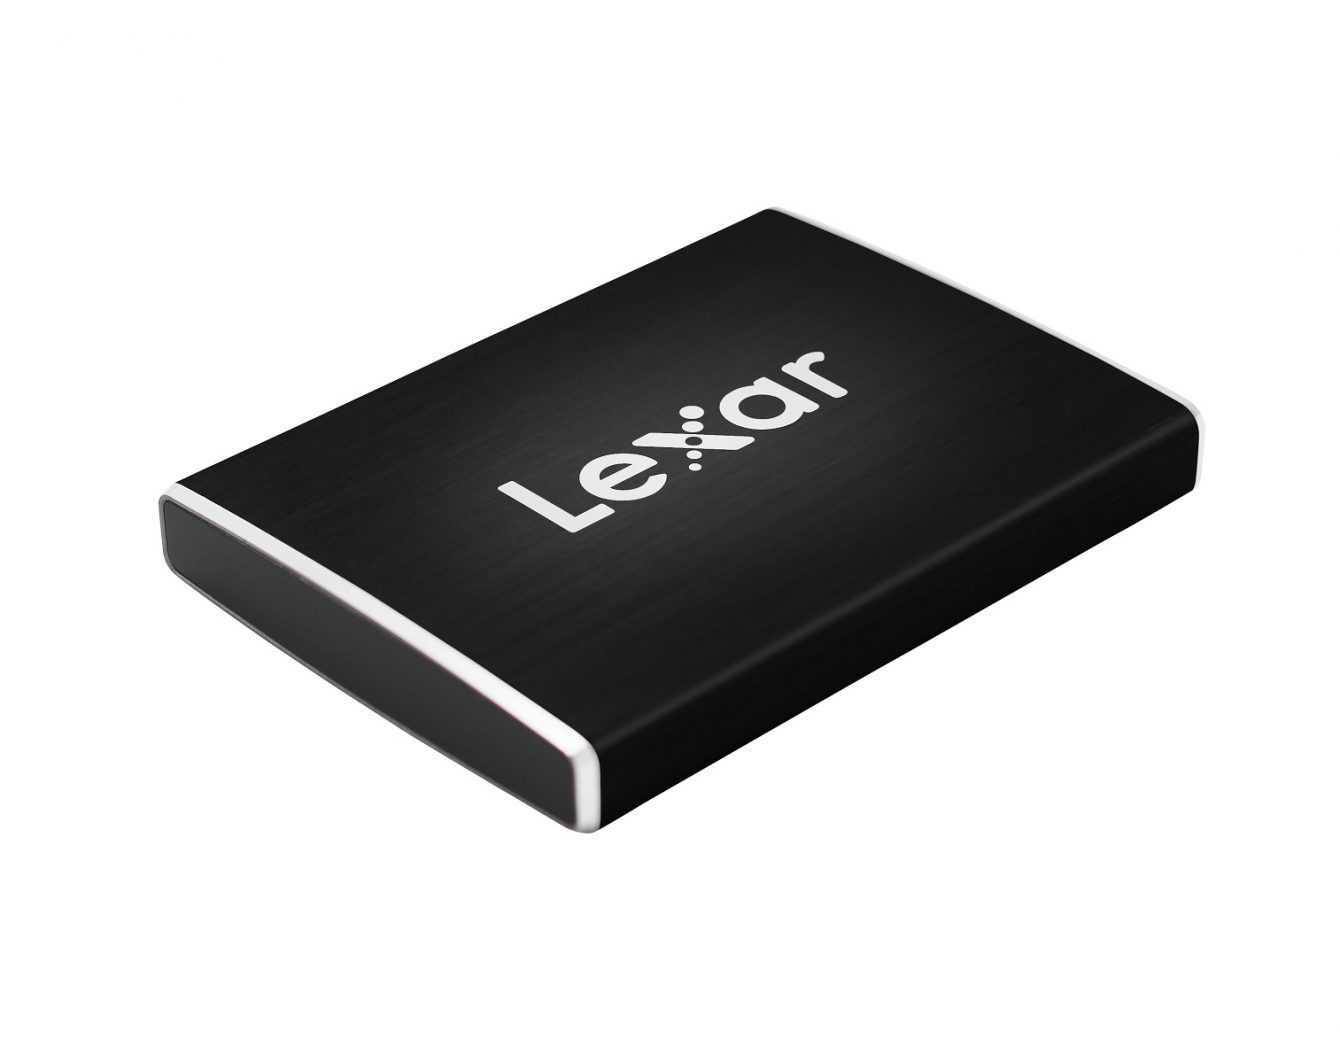 Lexar SL100 Pro: the SSD designed for professionals